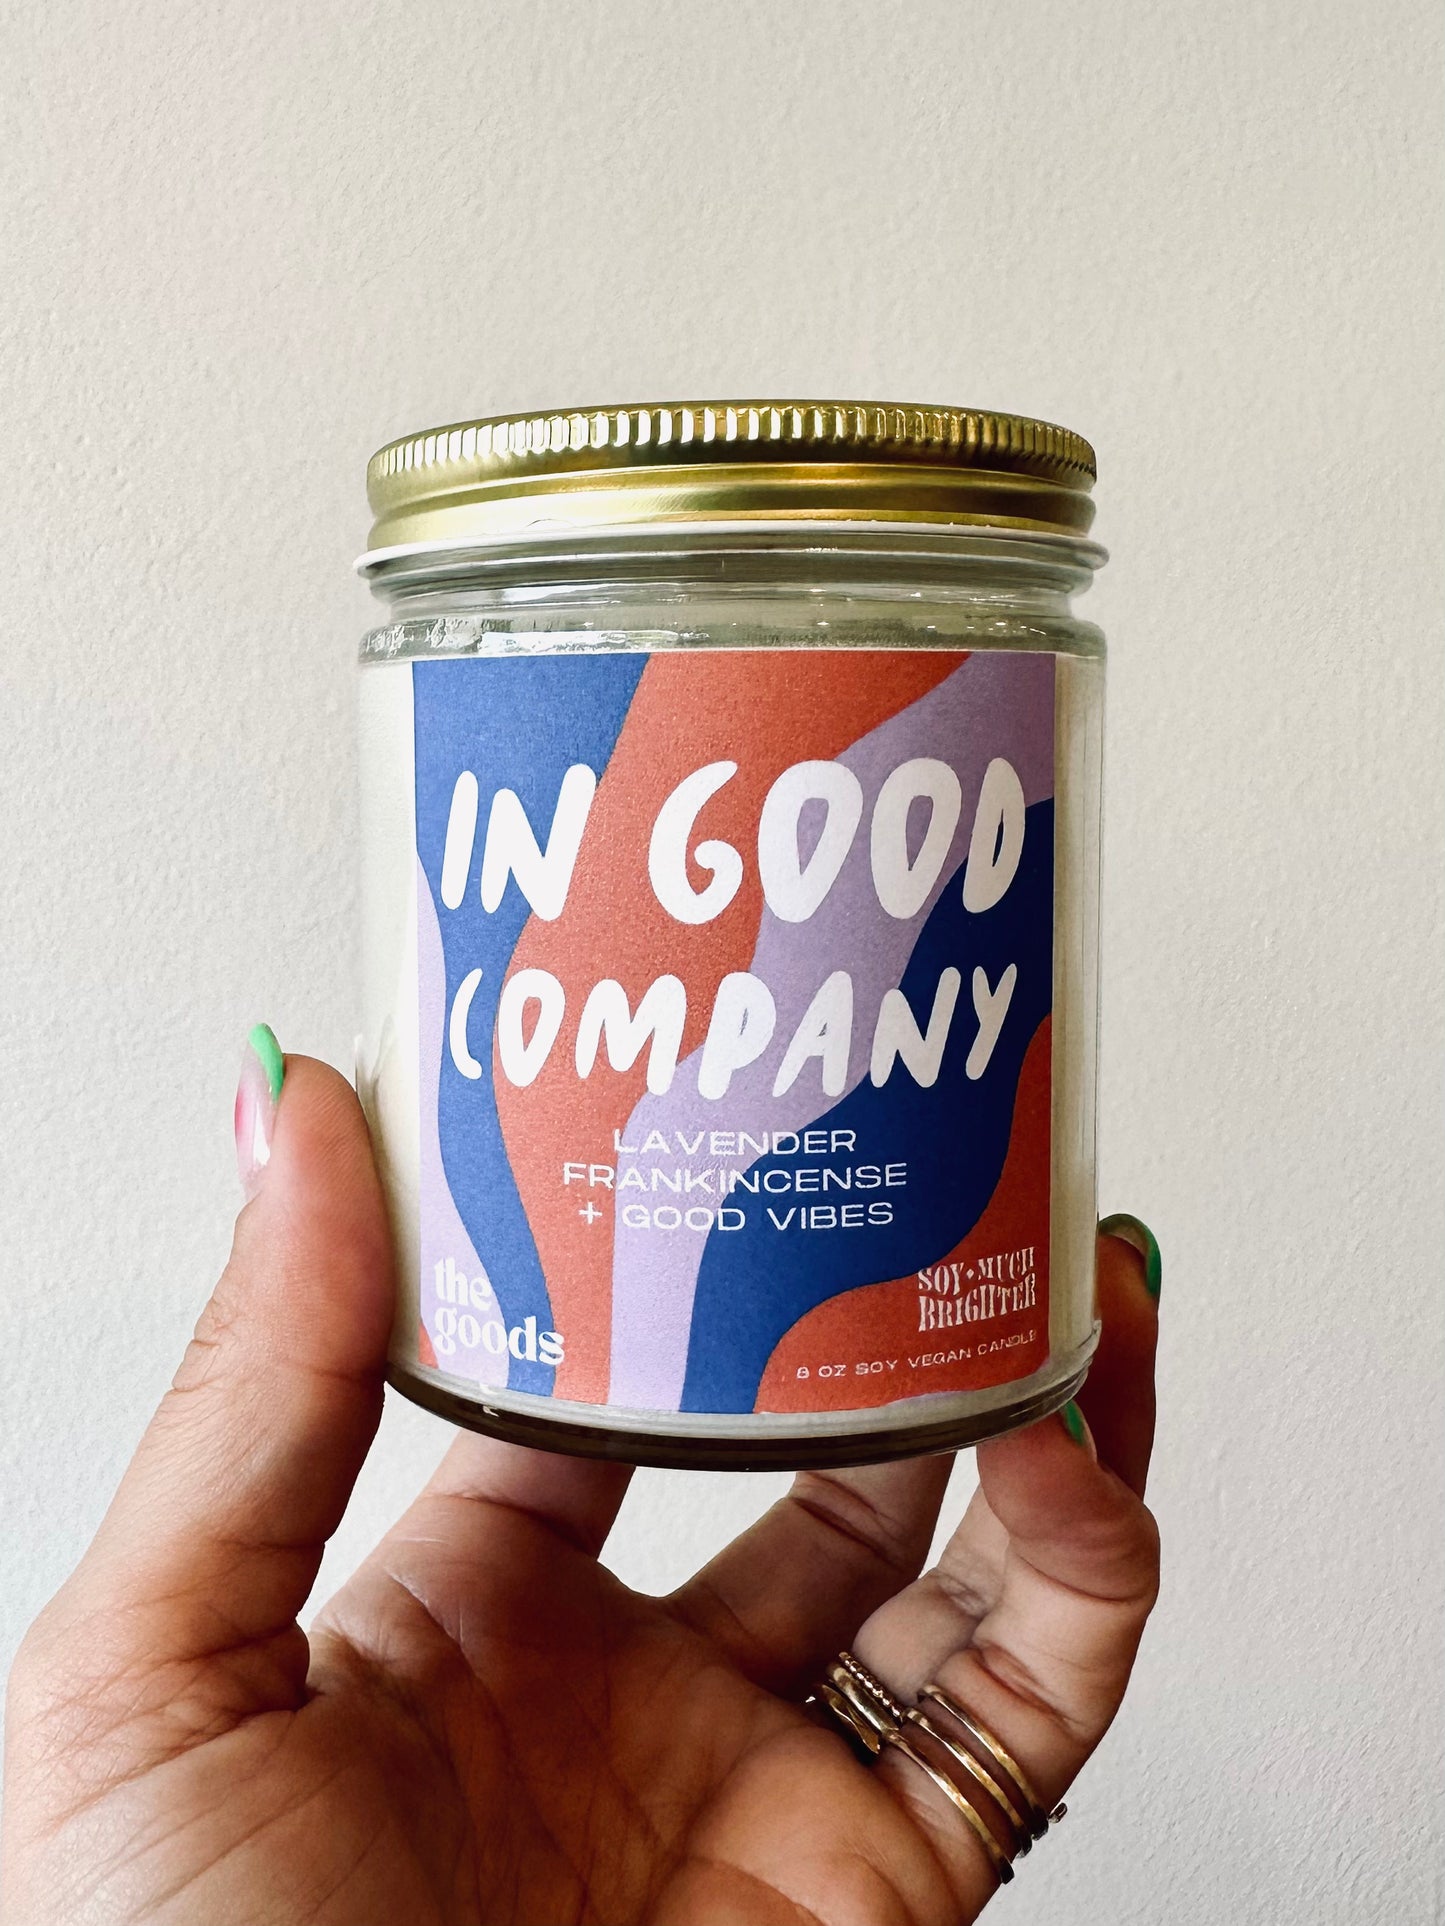 In Good Company Candle: Lavender, Frankincense + Good Vibes, 8 oz